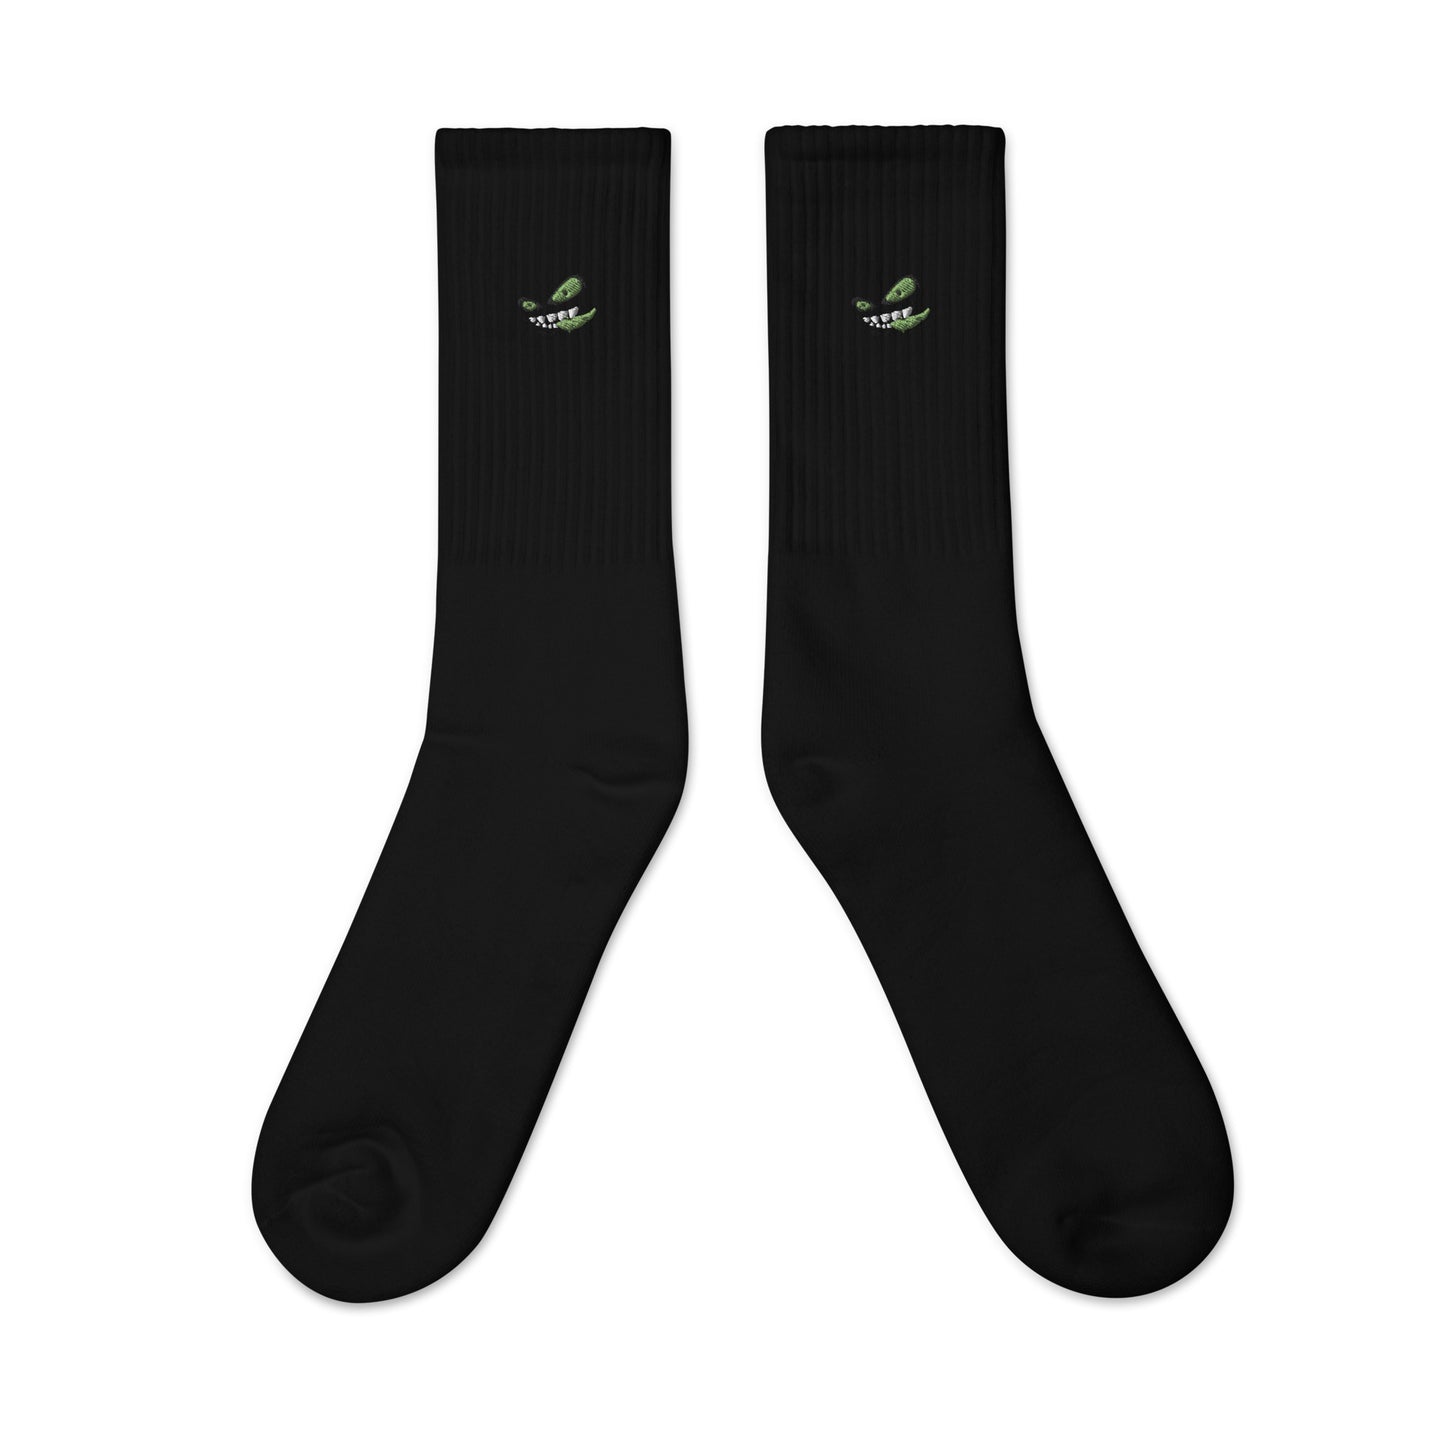  socks-from-the-front-with-monster-symbol